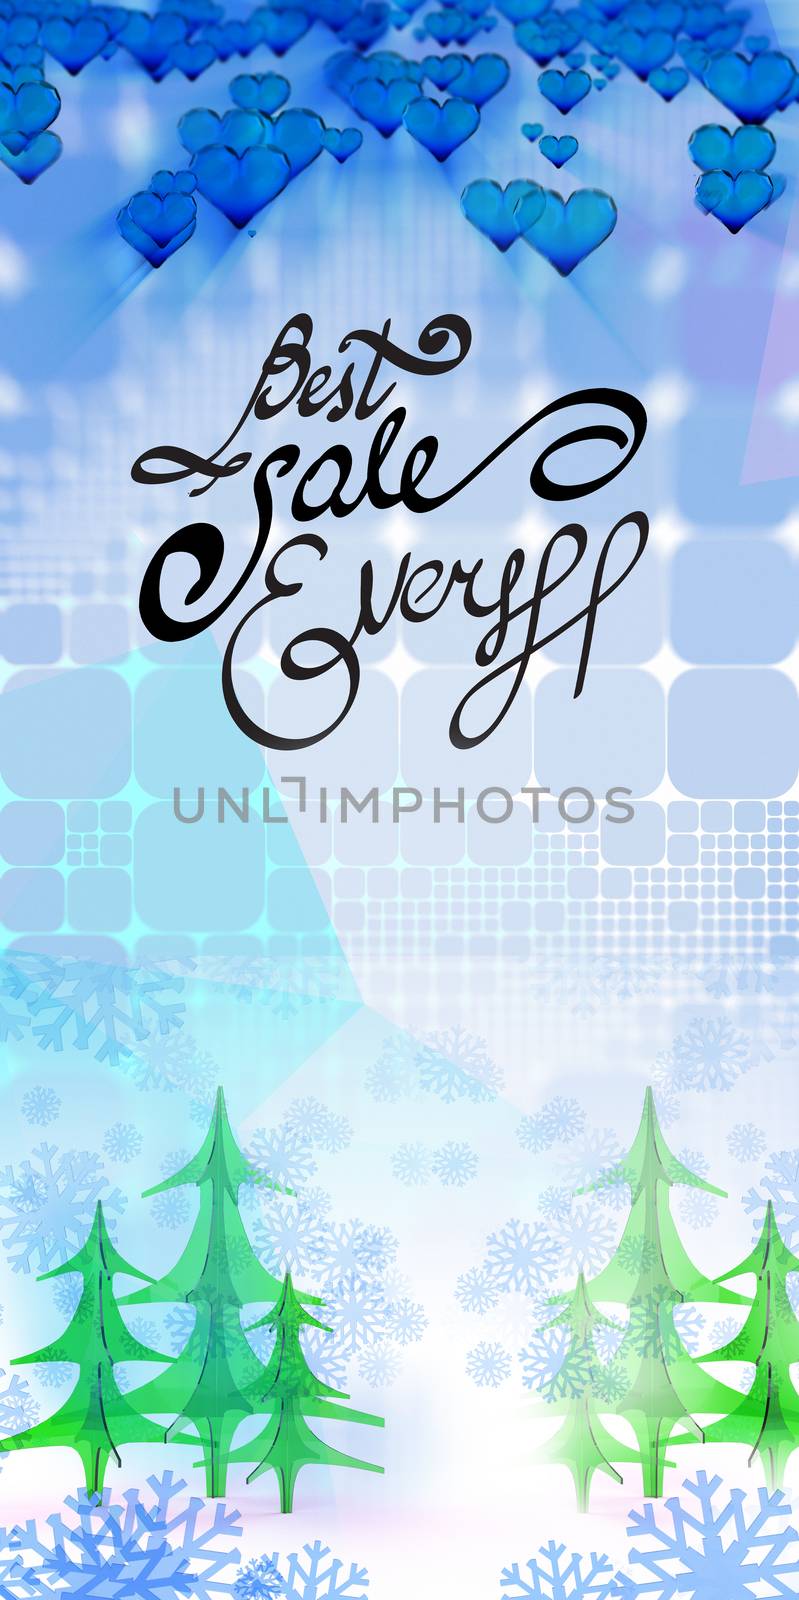 Best Sale Ever letering on geometric square abstract background with christmas tree hearts and snowflakes. 3d illustration.